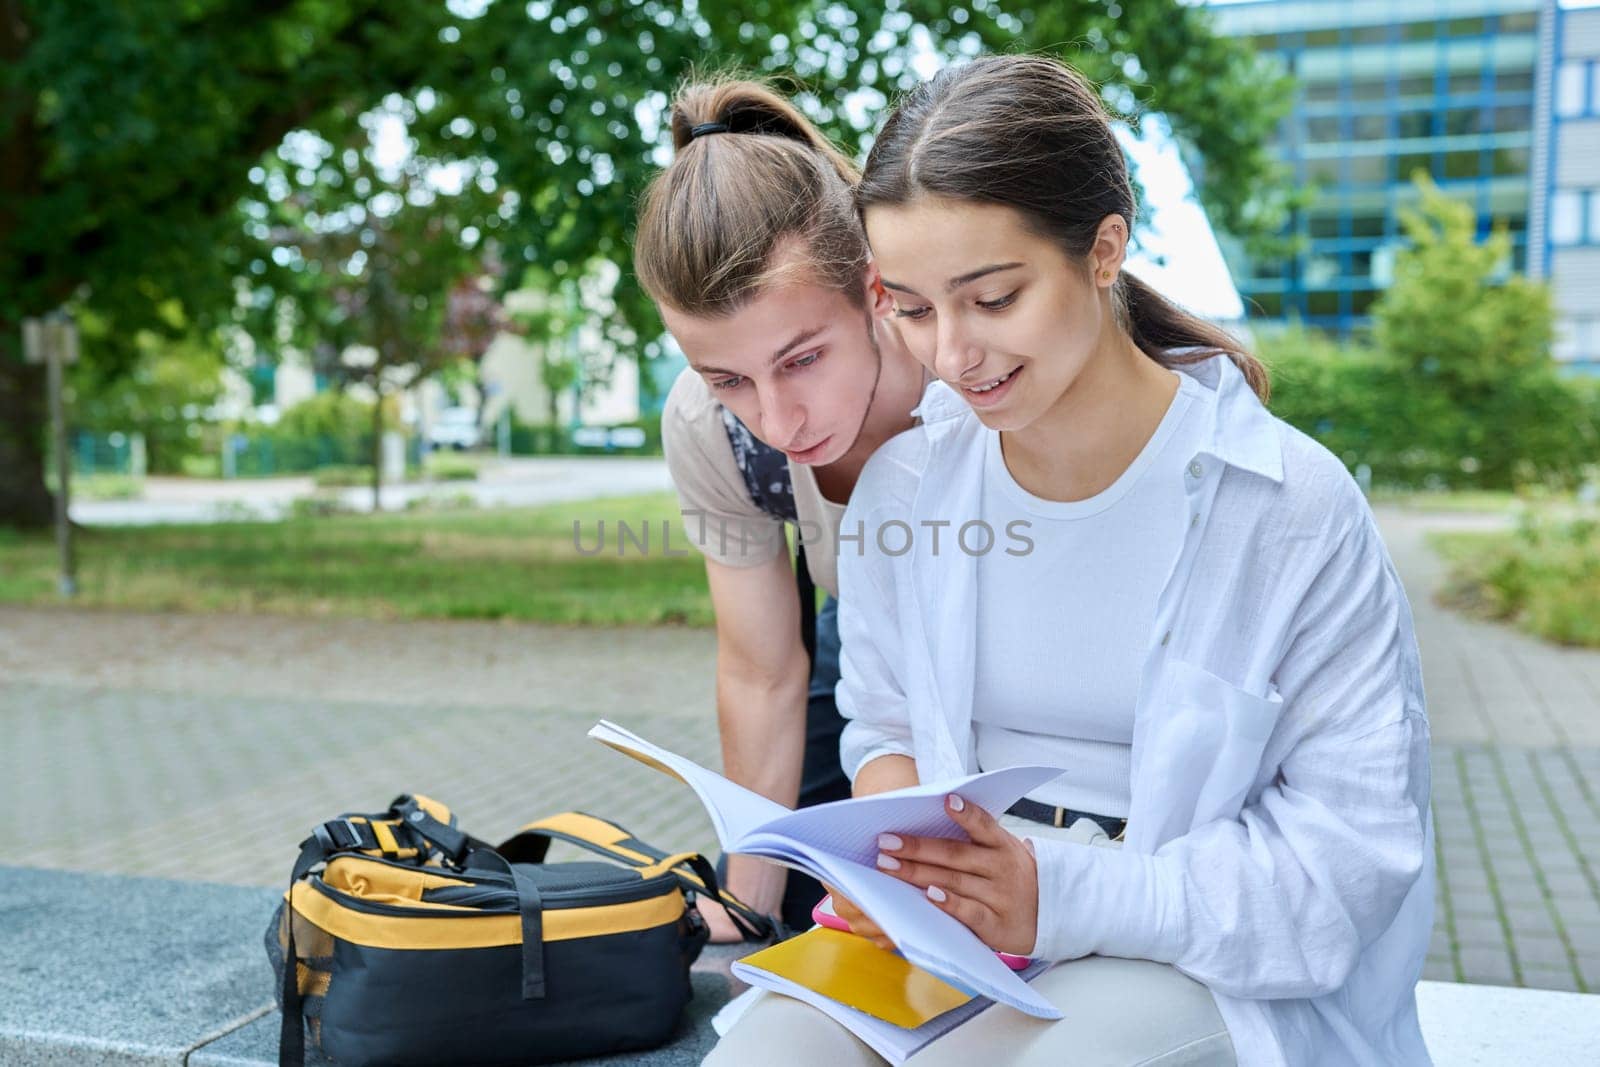 Two high school students guy and girl outdoor, school building background. Education, friendship, youth, adolescence concept